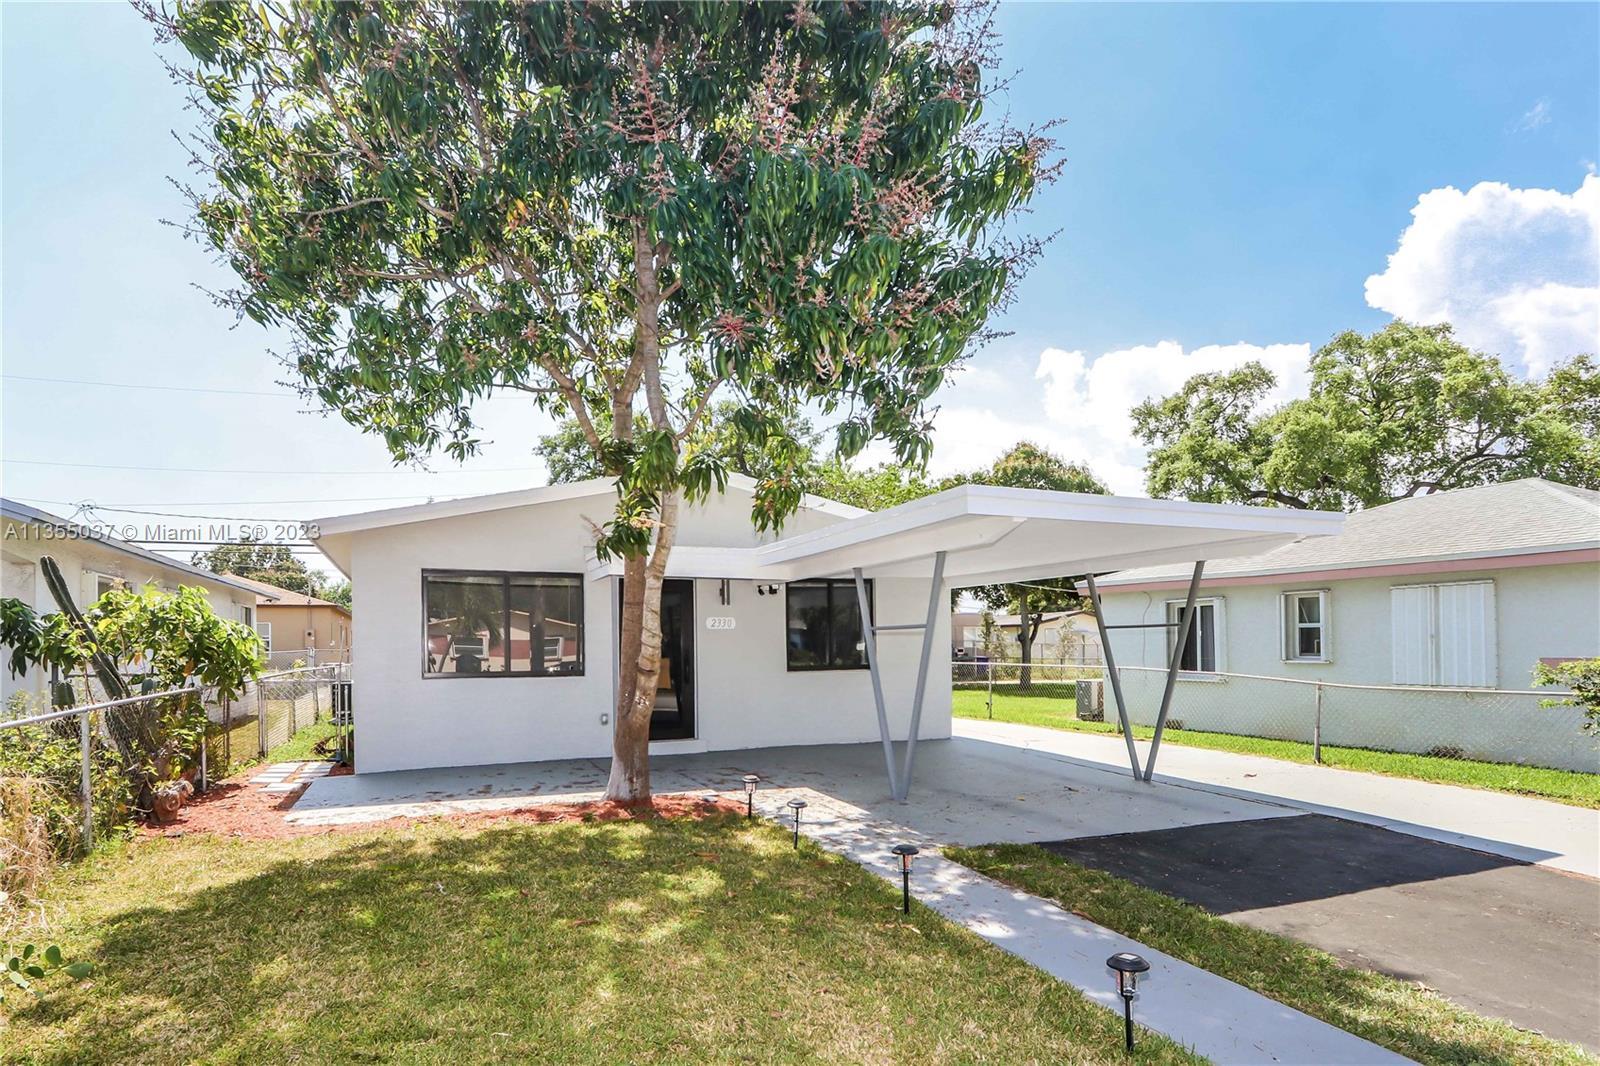 Fully remodeled private home. This 3-bedroom 2-bathroom home is located in a peaceful neighborhood t